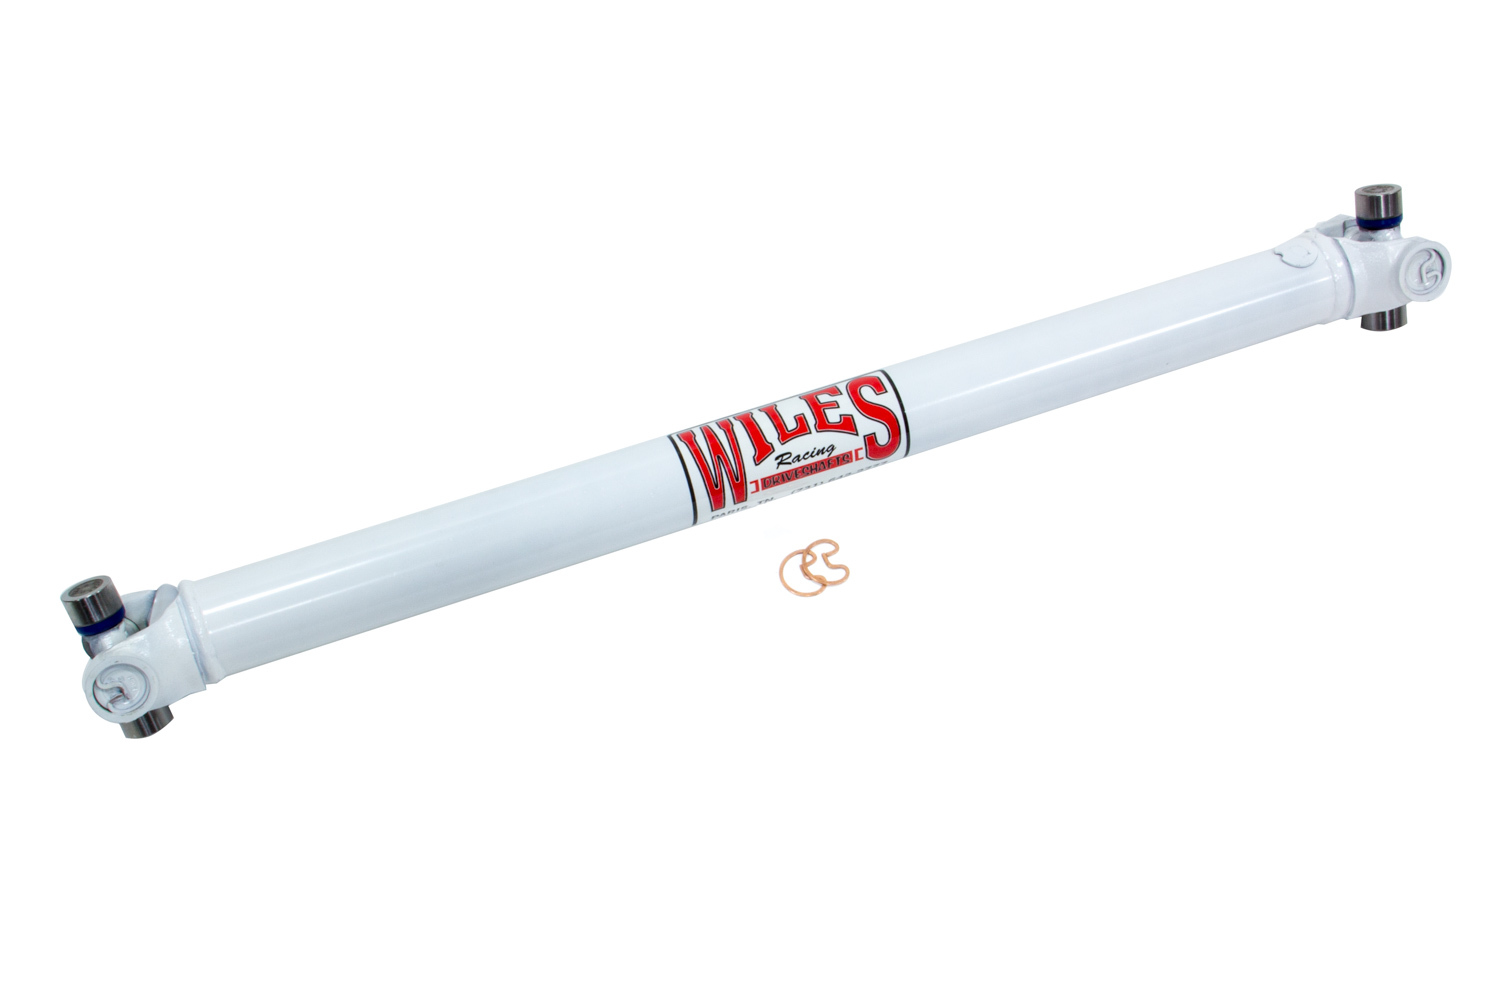 Wiles Driveshaft S283335 Drive Shaft, 33.500 in Long, 2 in OD, 1310 U-Joints, Steel, White Paint, Universal, Each